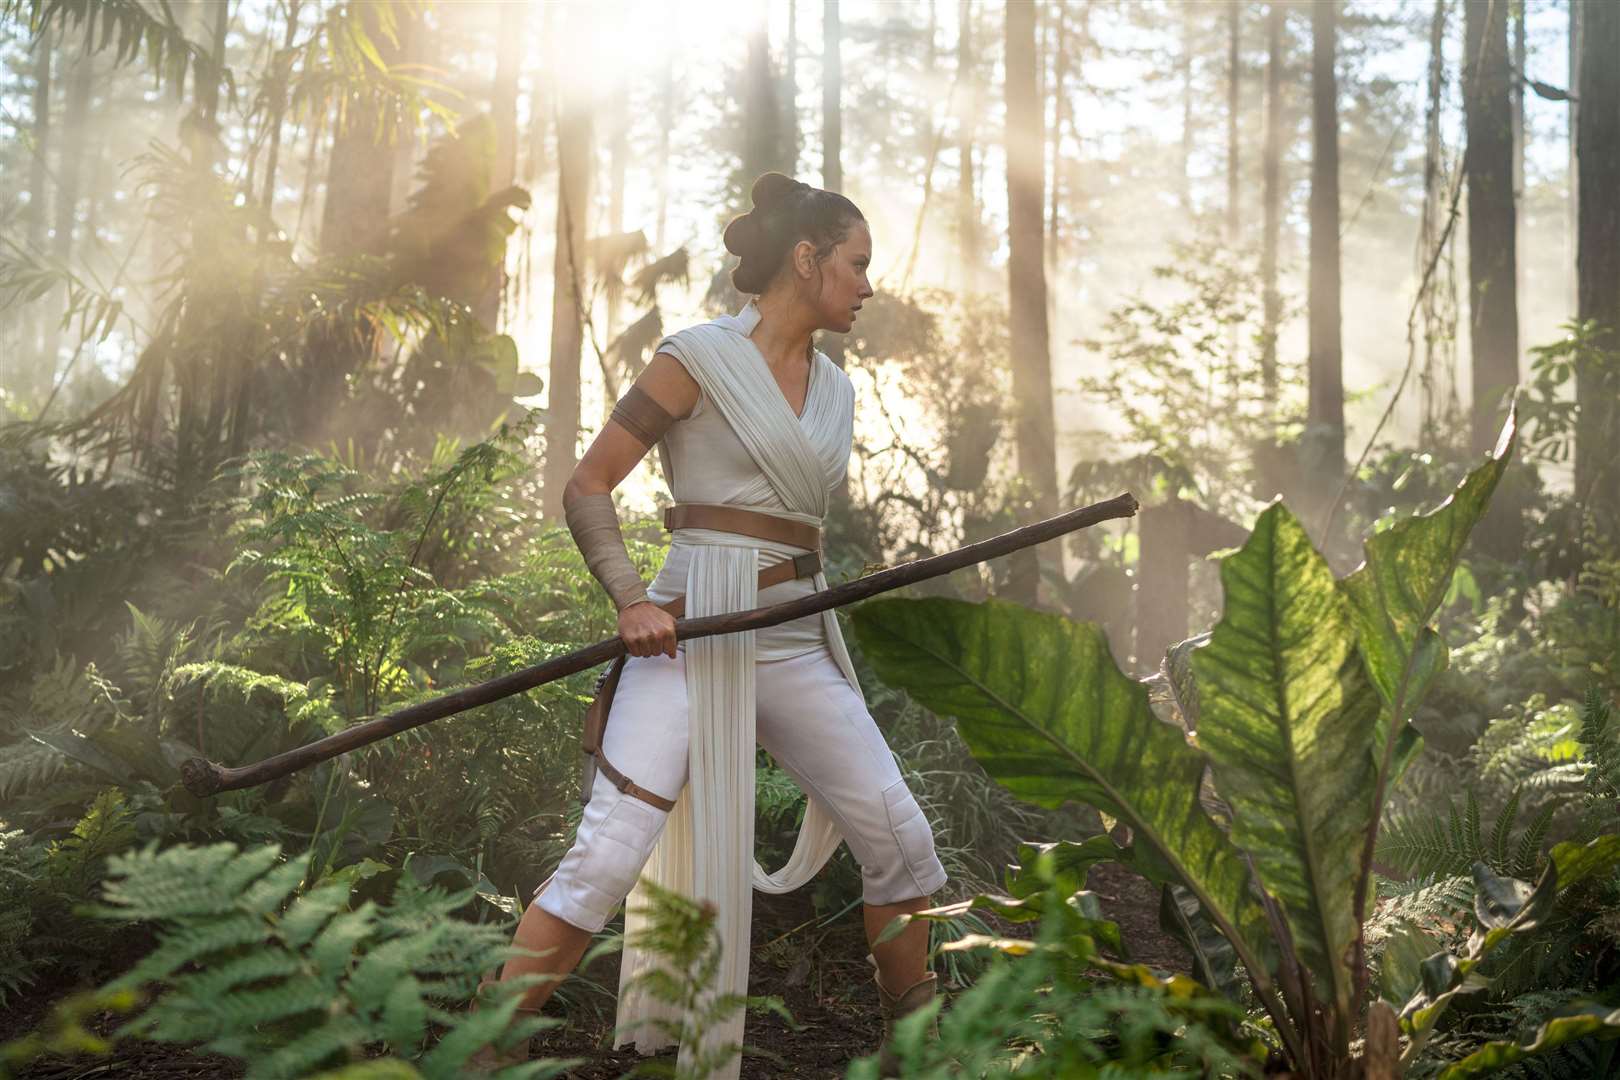 Star Wars Episode IX: The Rise Of Skywalker. Pictured: Daisy Ridley as Rey Picture: Lucasfilm Ltd/Jonathan Olley